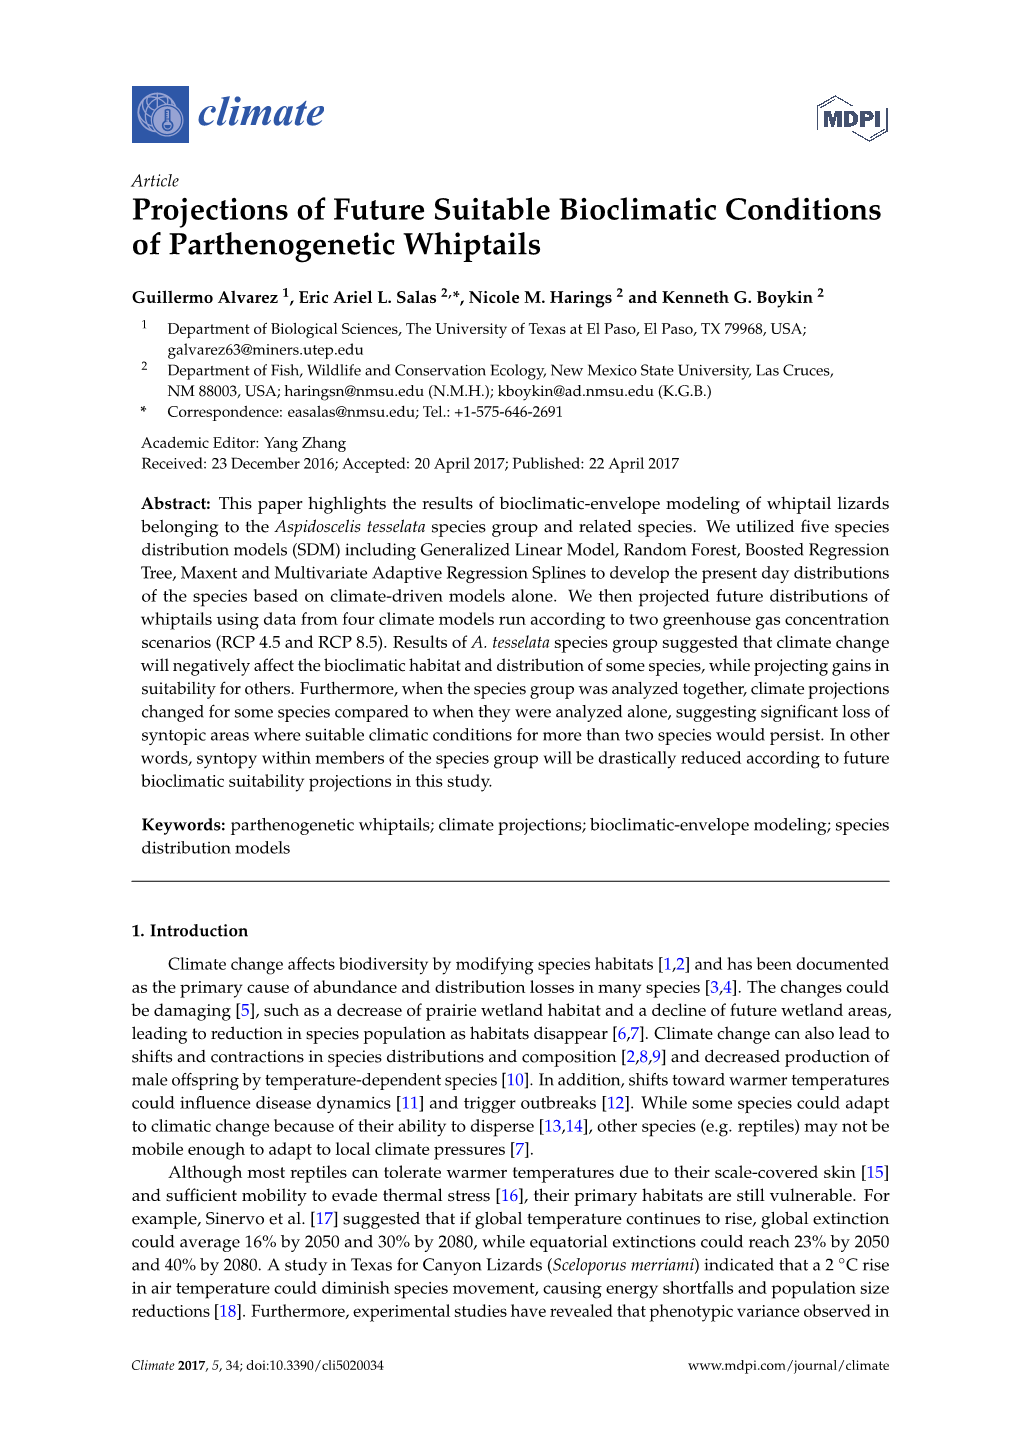 Projections of Future Suitable Bioclimatic Conditions of Parthenogenetic Whiptails